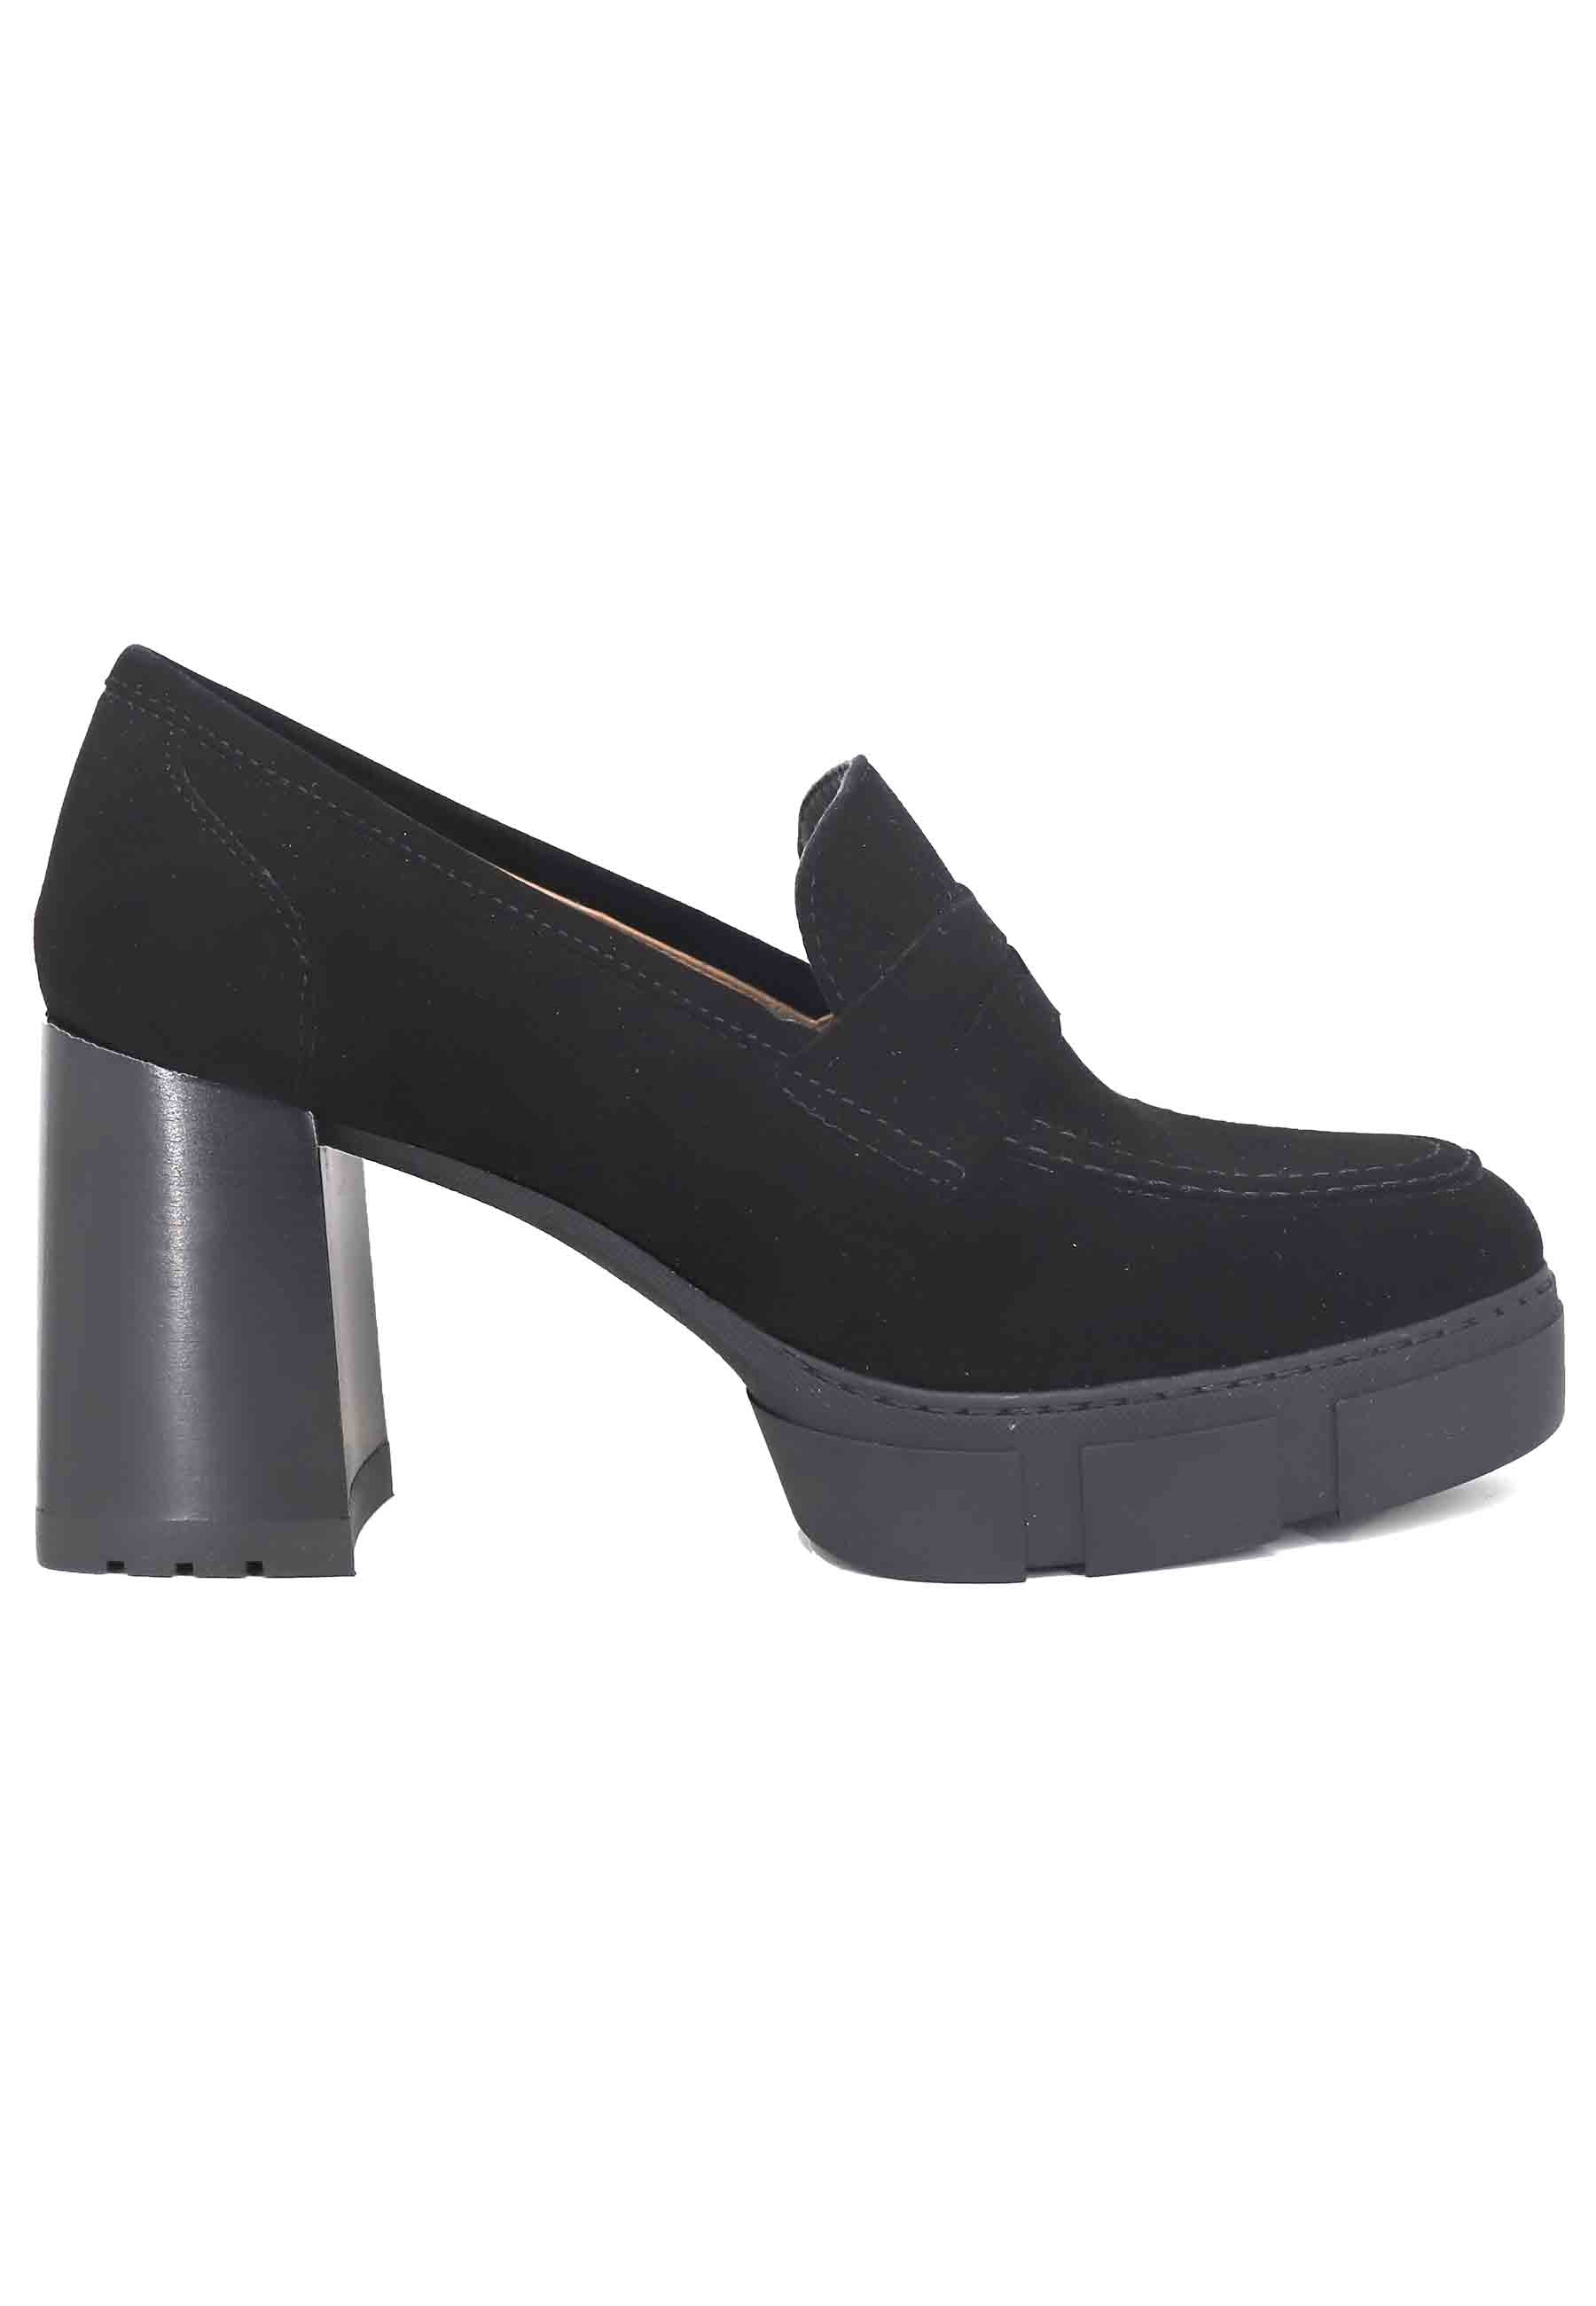 Women's black suede loafers with high heel and platform